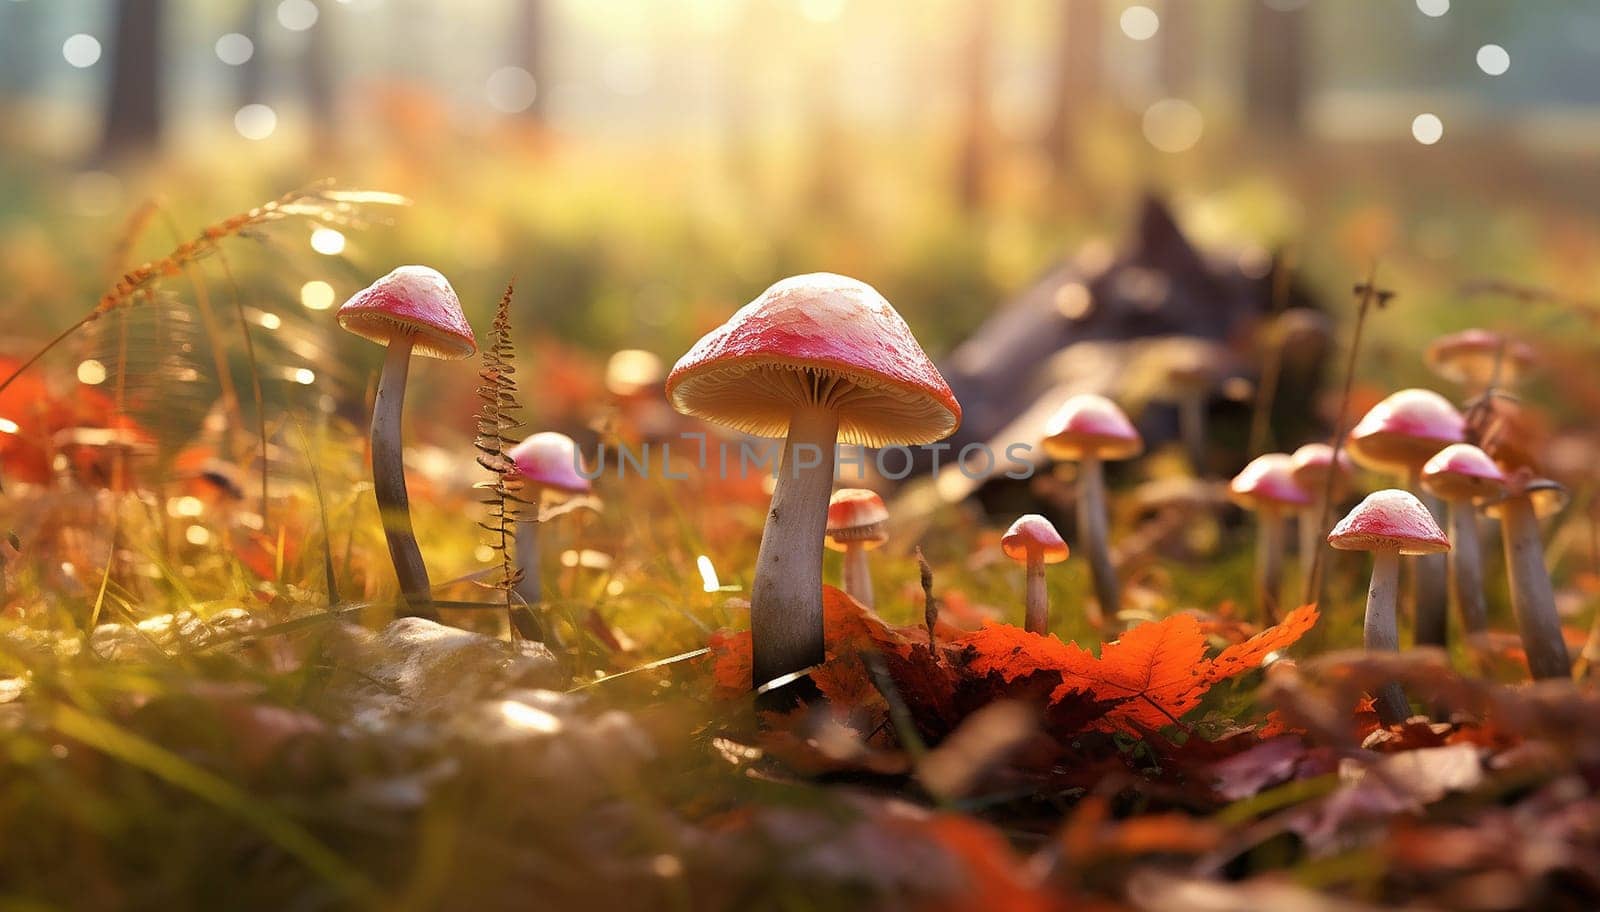 beautiful closeup of forest mushrooms in grass, autumn season. little fresh mushrooms, growing in Autumn Forest. mushrooms and leafs in forest. Mushroom picking concept. Magical colorful yellow fall background beauty